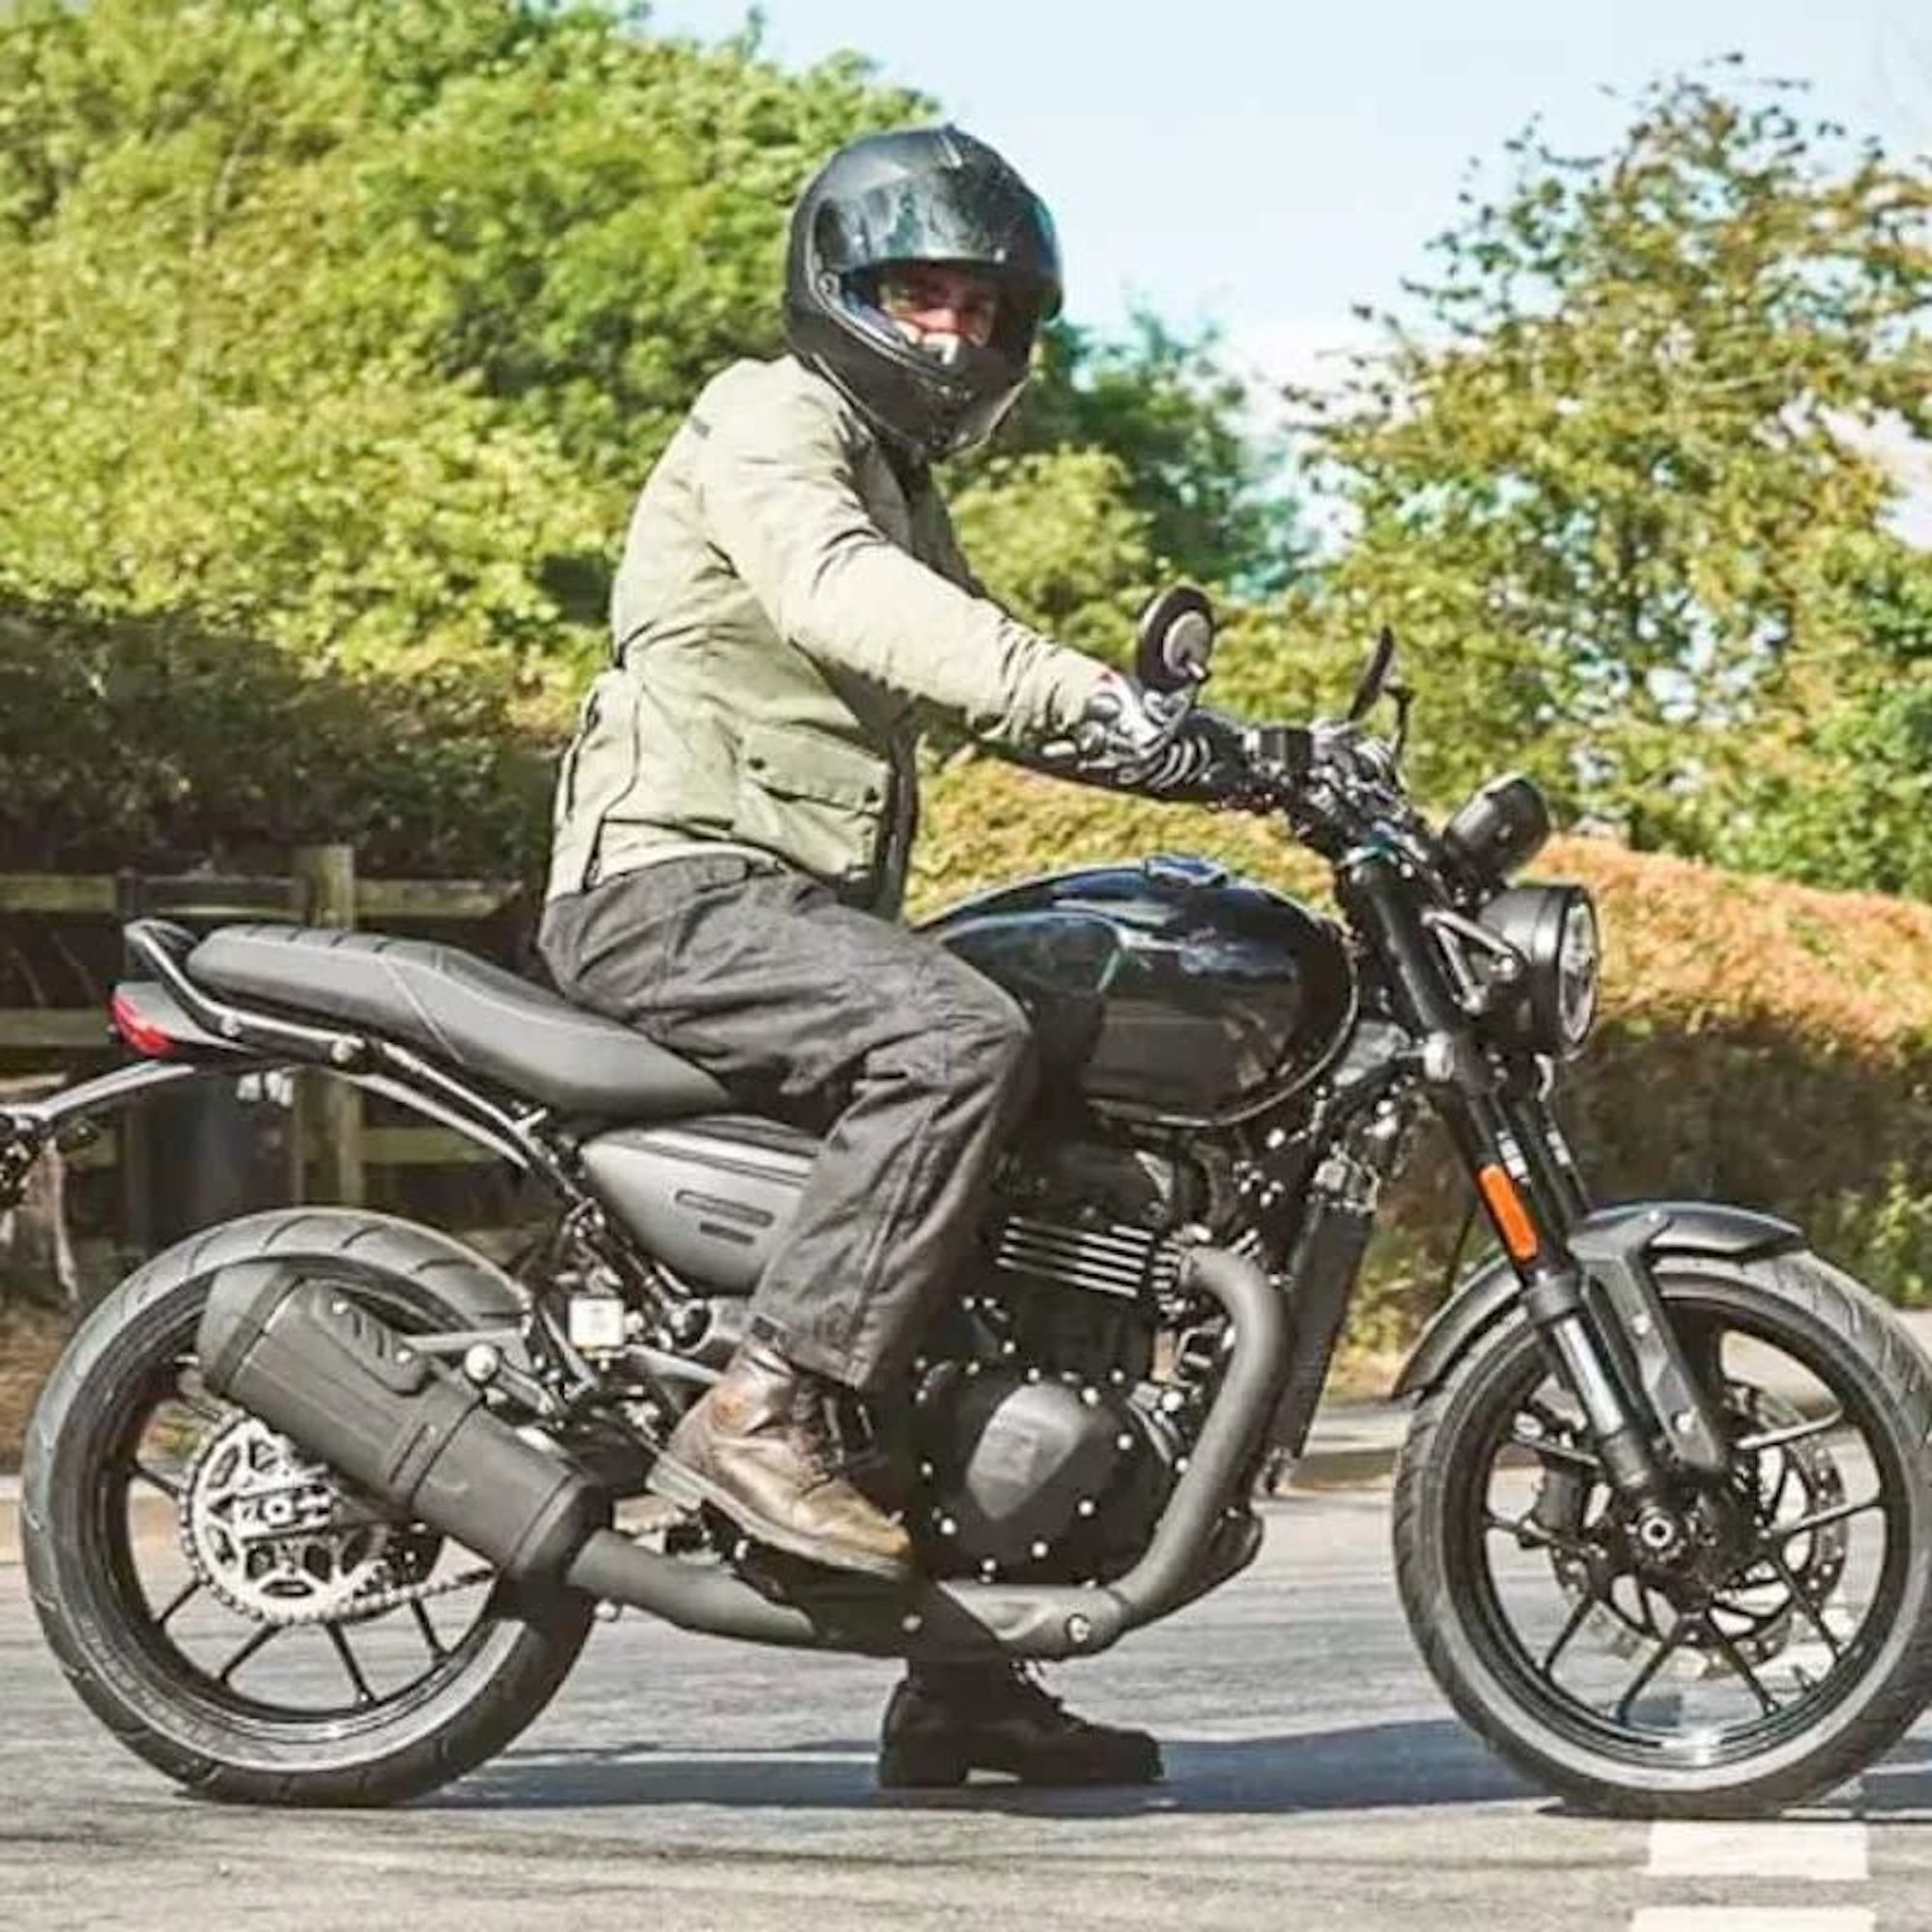 A view of the new Neo-retro naked and scrambler roadsters that Triumph and Bajaj will be debuting in July. Media sourced from Motorcycle Sports.